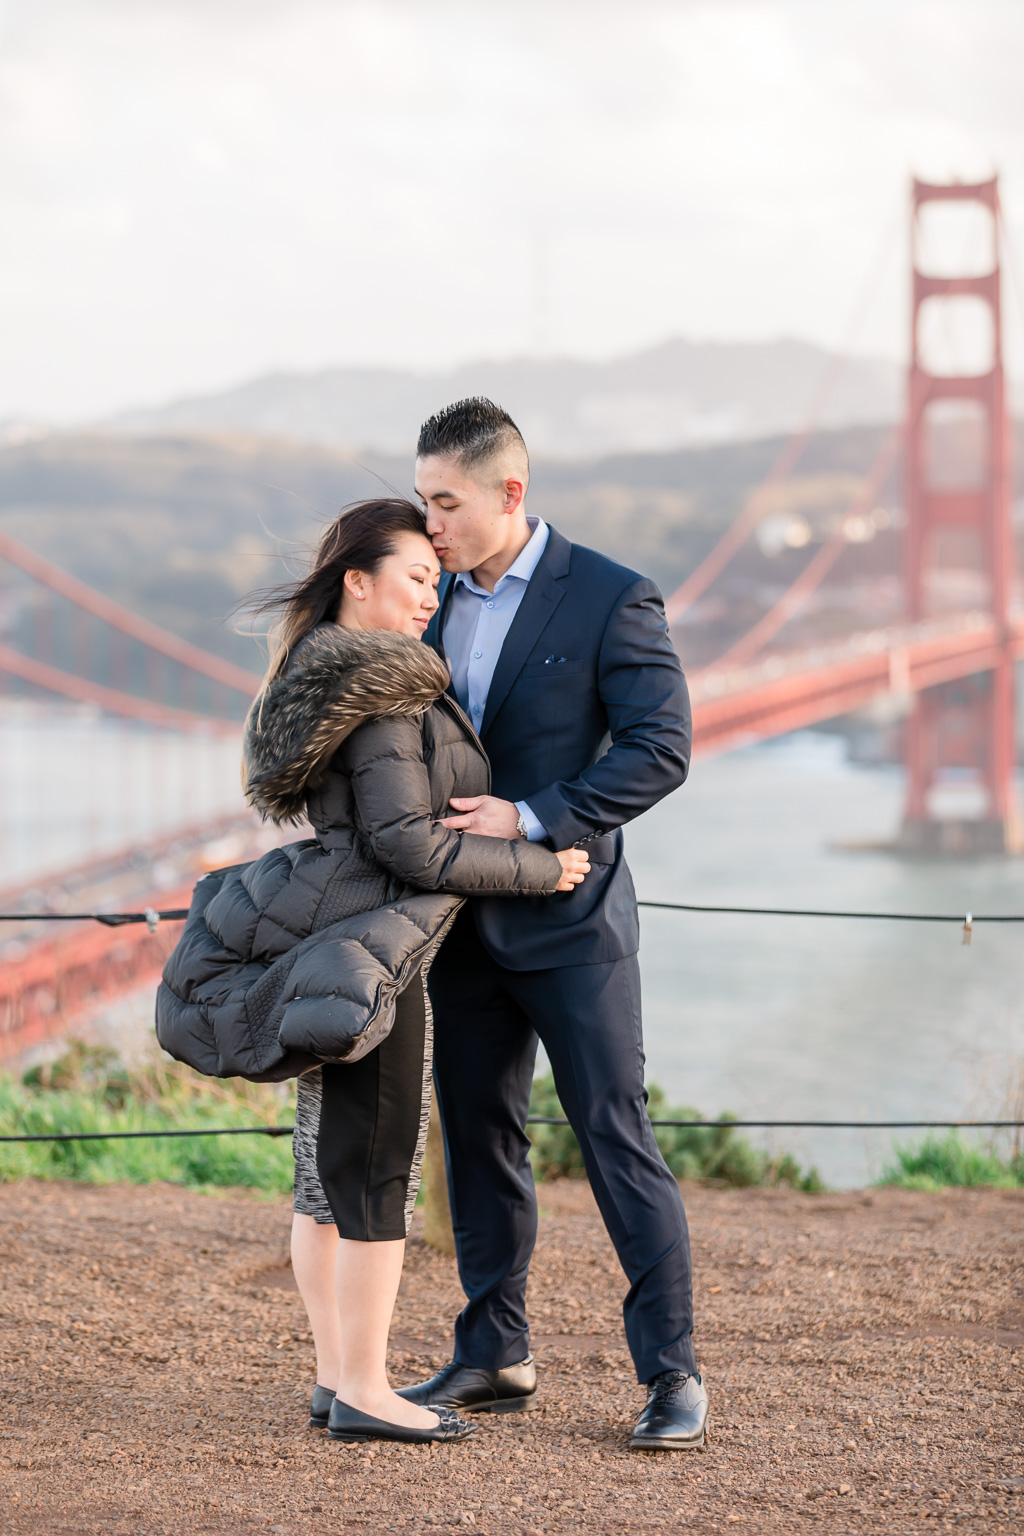 proposed and engaged right in front of the golden gate bridge